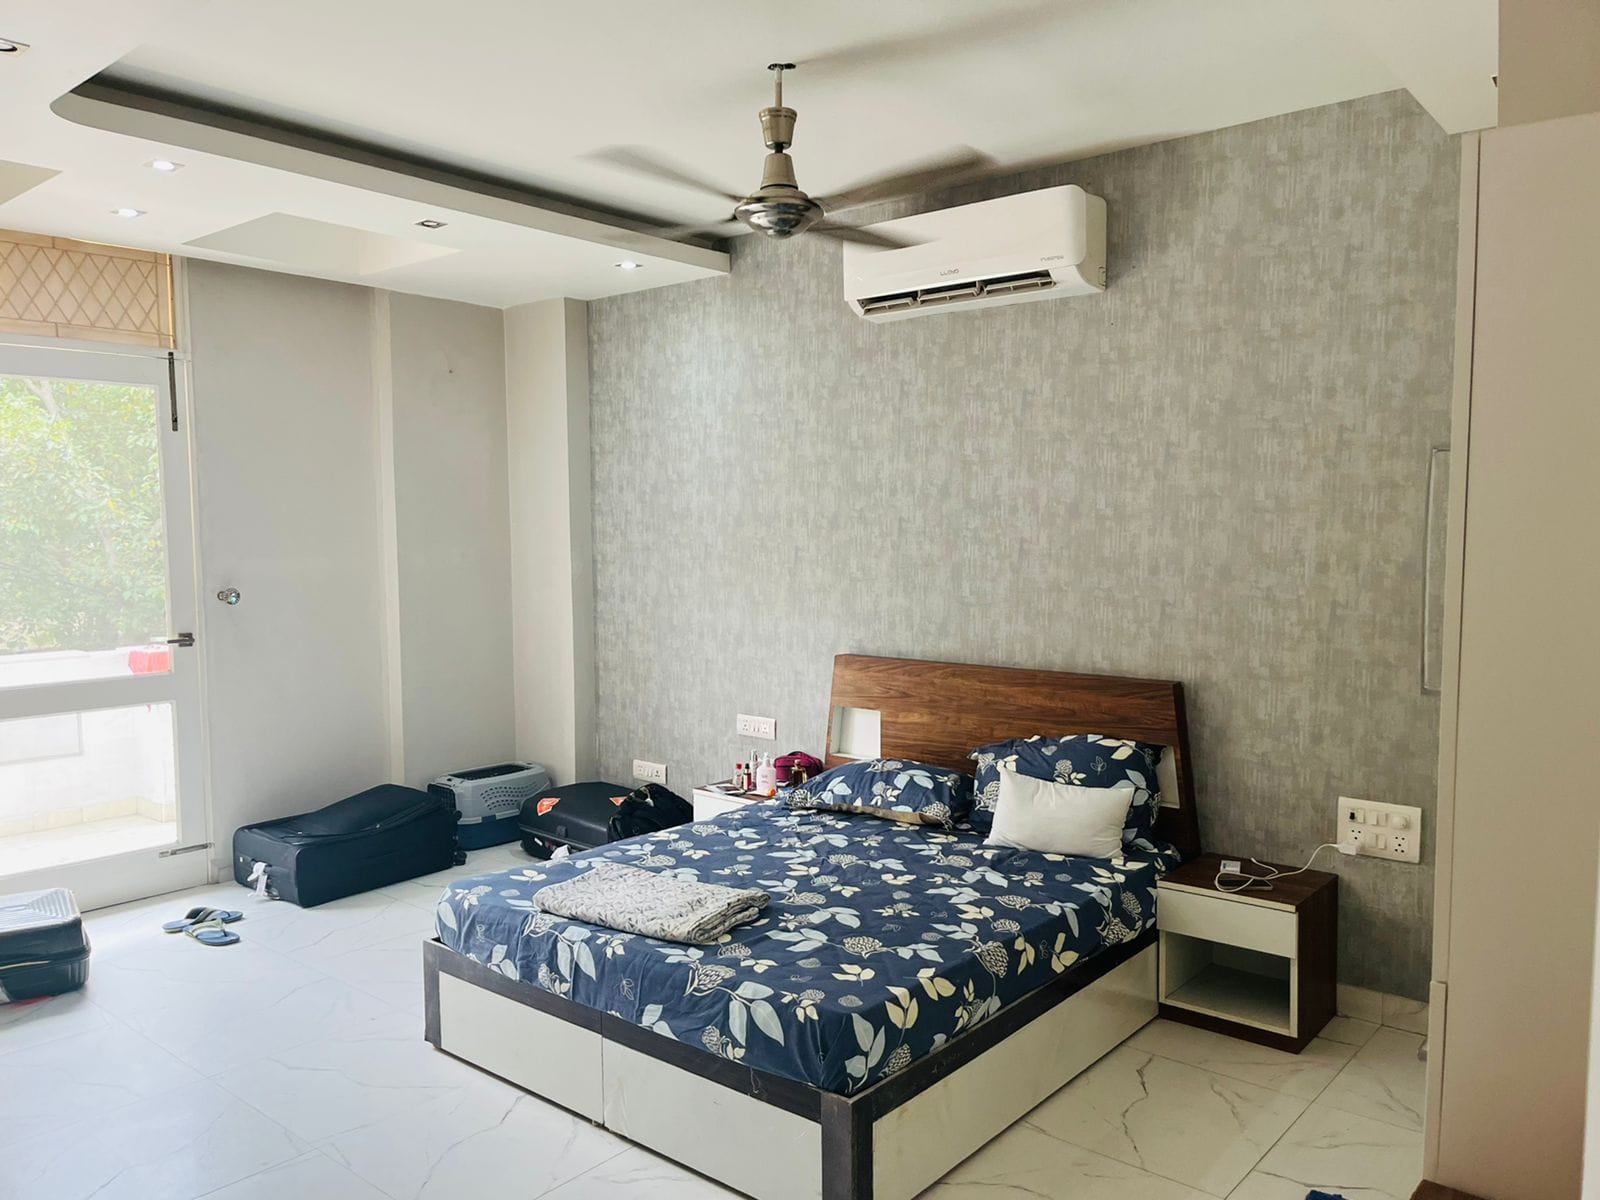 3 Bed/ 3 Bath Apartment/ Flat, Furnished for rent @Greater Kailash 2